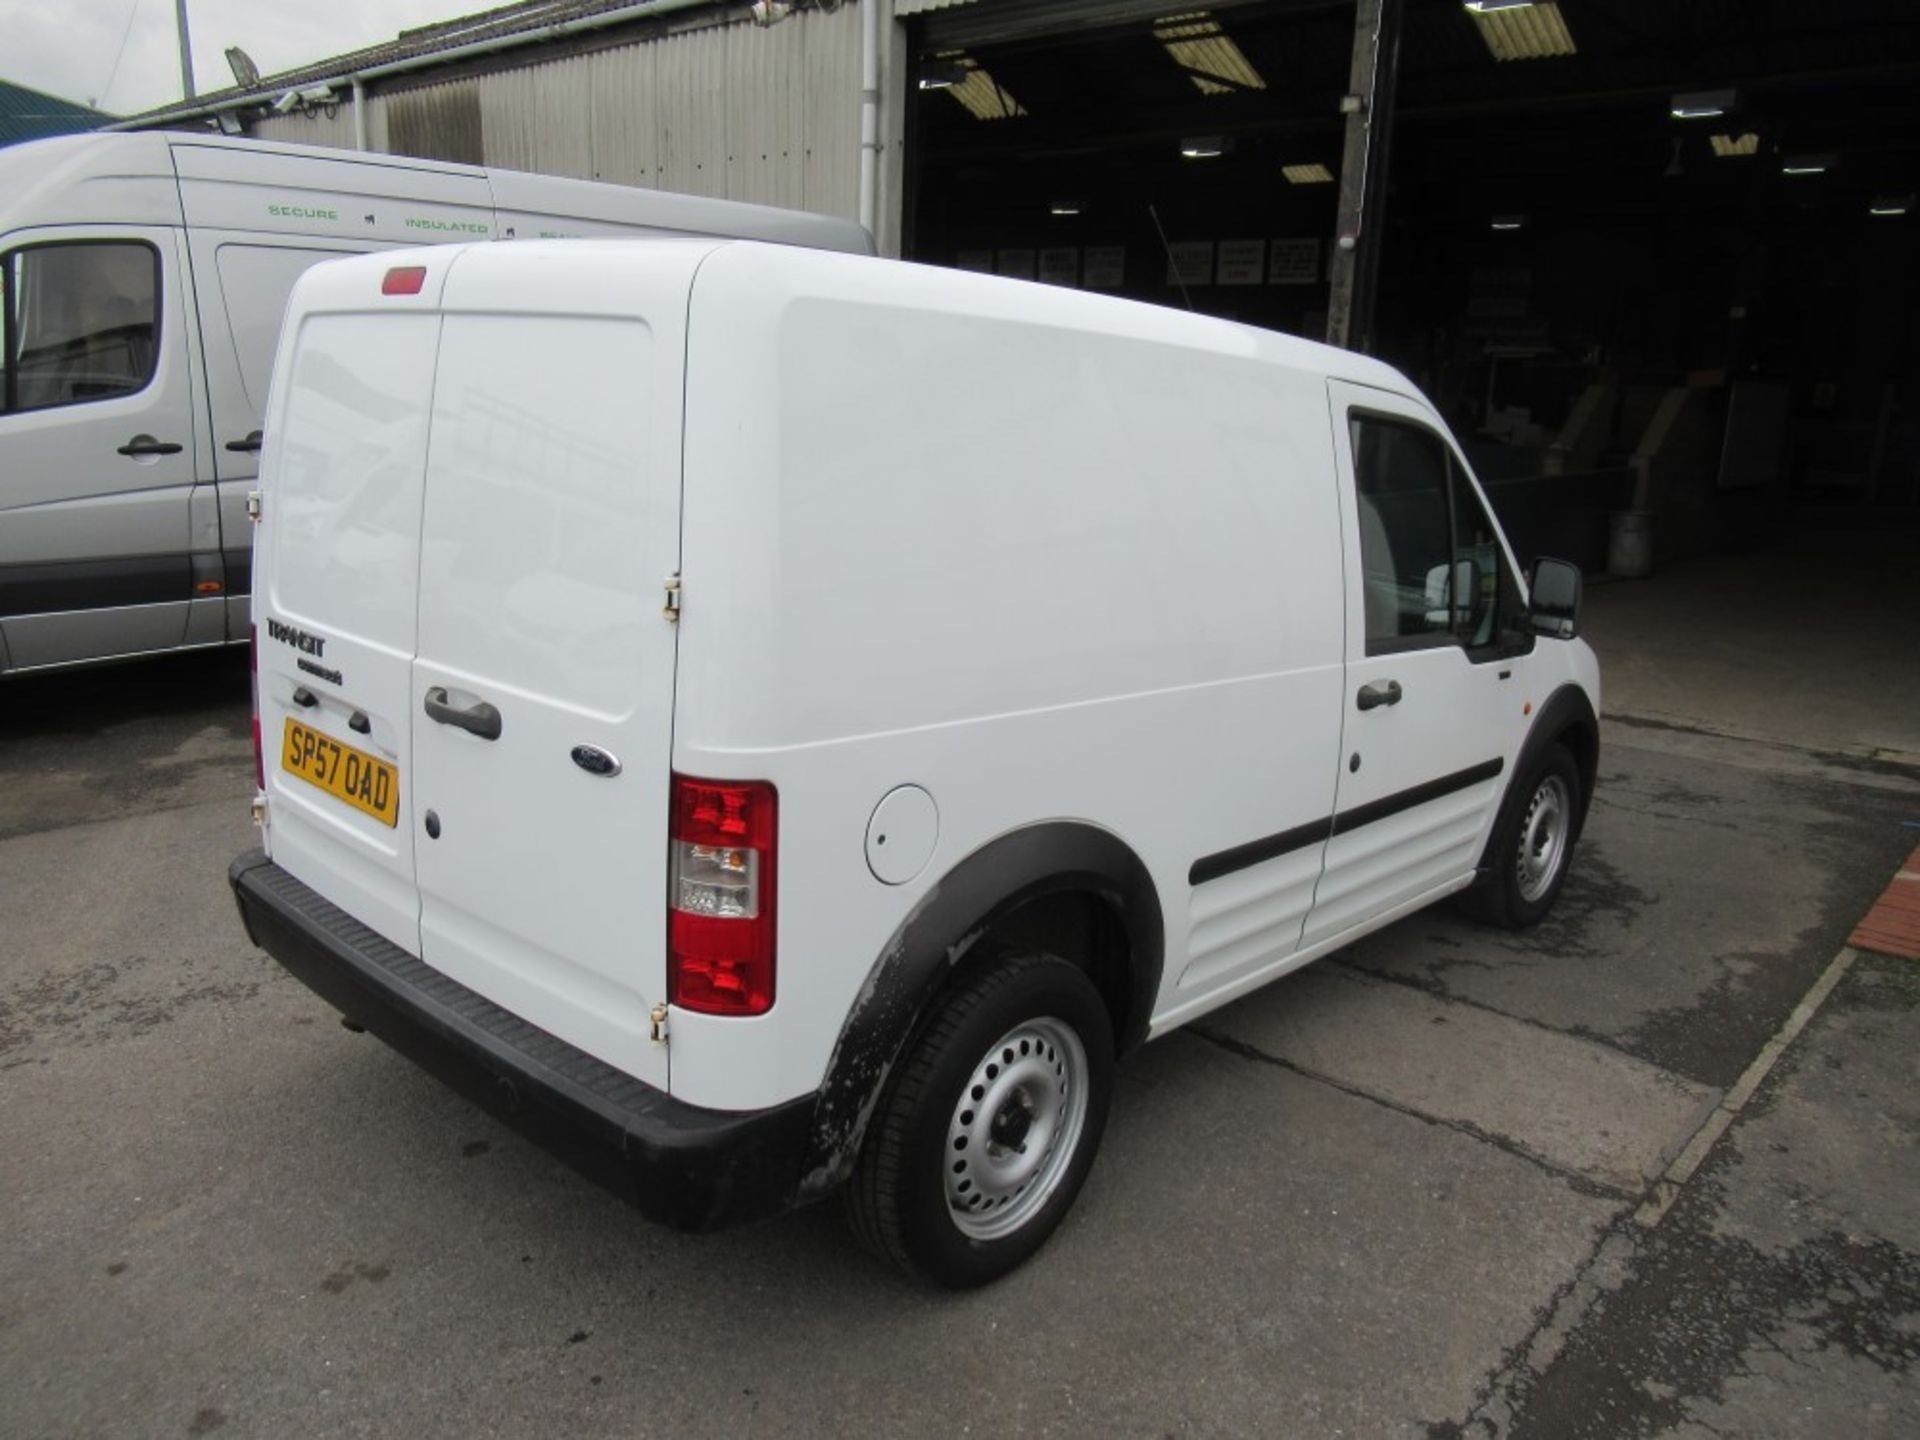 57 reg FORD TRANSIT CONNECT T200 L75, 1ST REG 09/07, 73553M NOT WARRANTED, V5 HERE, 2 FORMER KEEPERS - Image 4 of 6